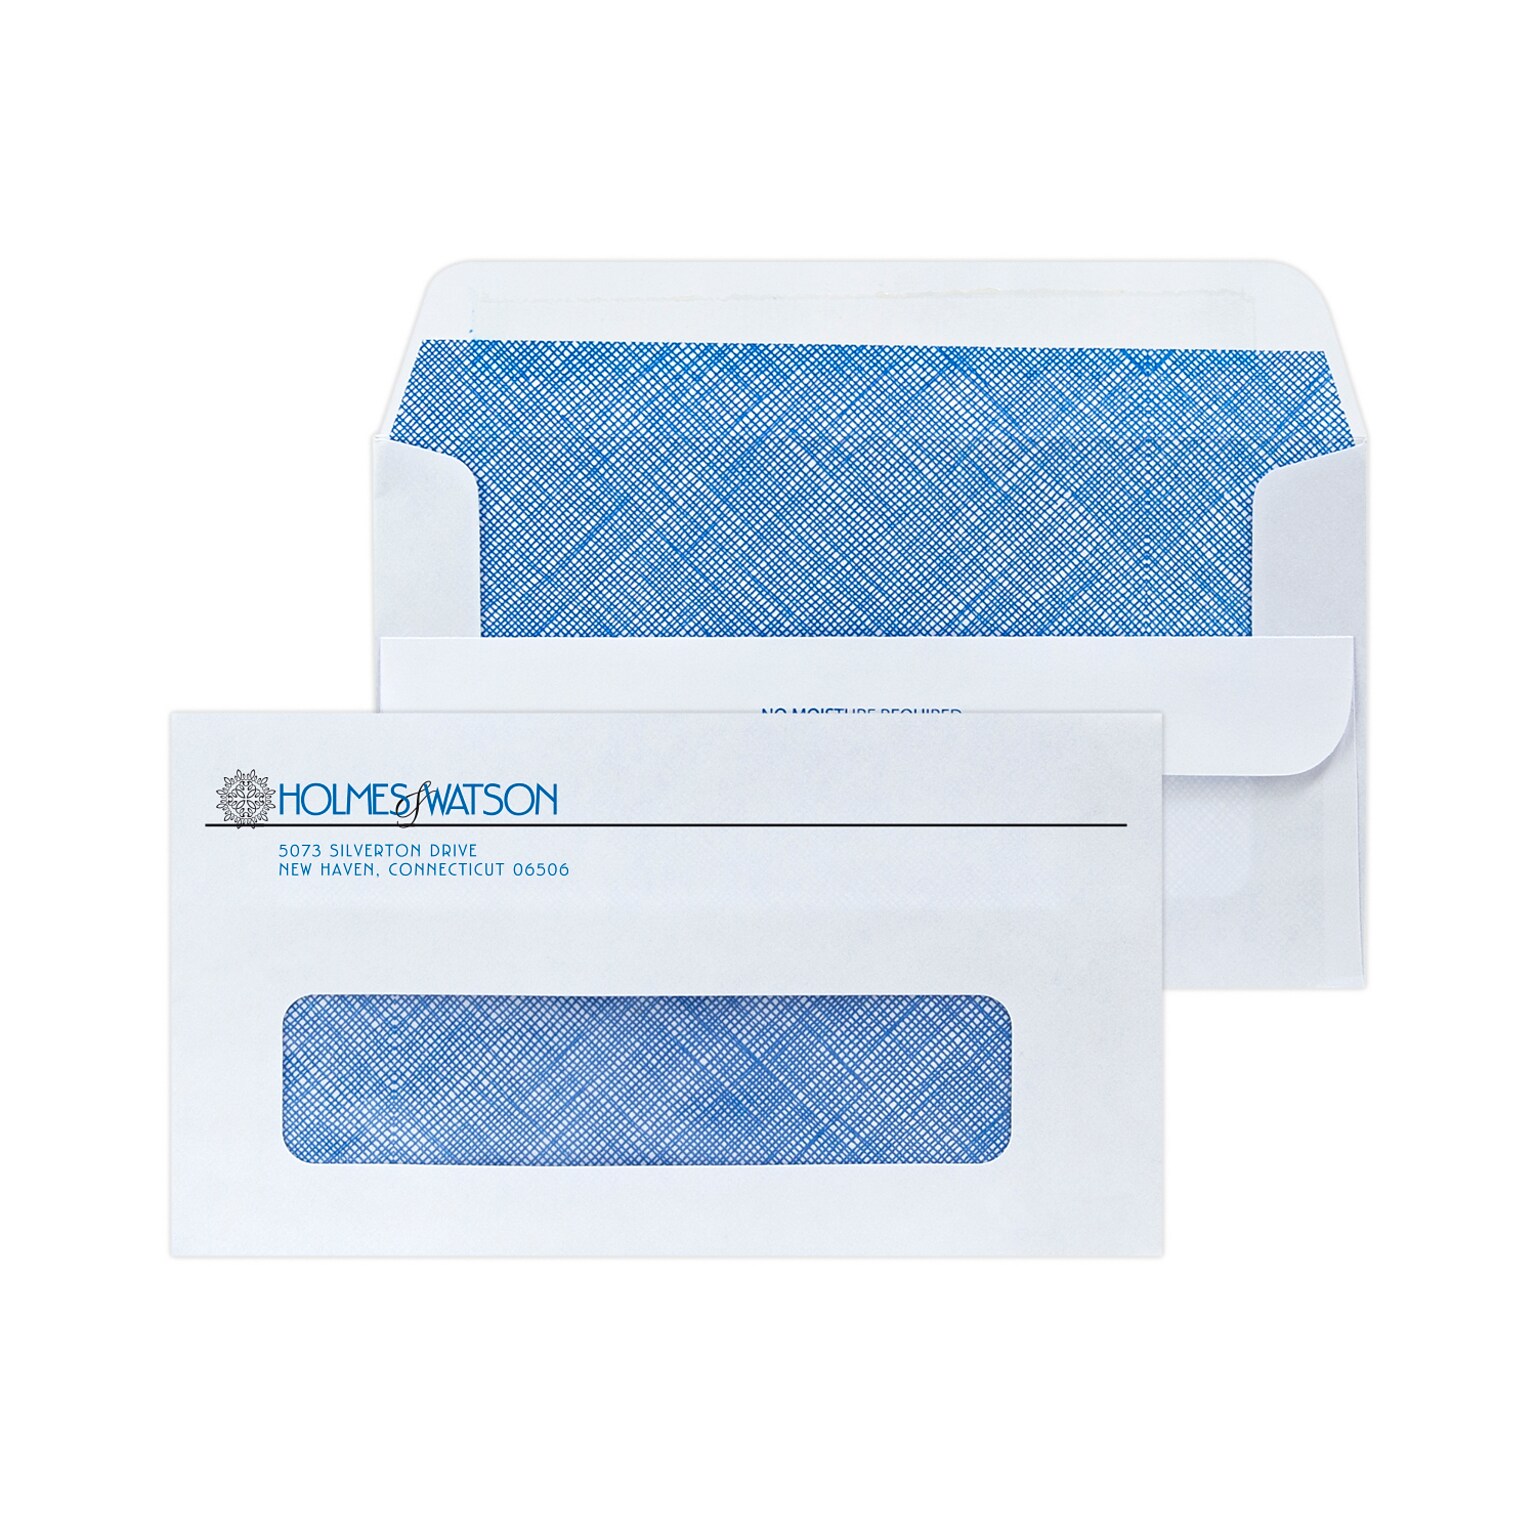 Custom #6-3/4 Self Seal Window Envelopes with Security Tint, 3 5/8 x 6 1/2, 24# White Wove, 2 Standard Inks, 250 / Pack